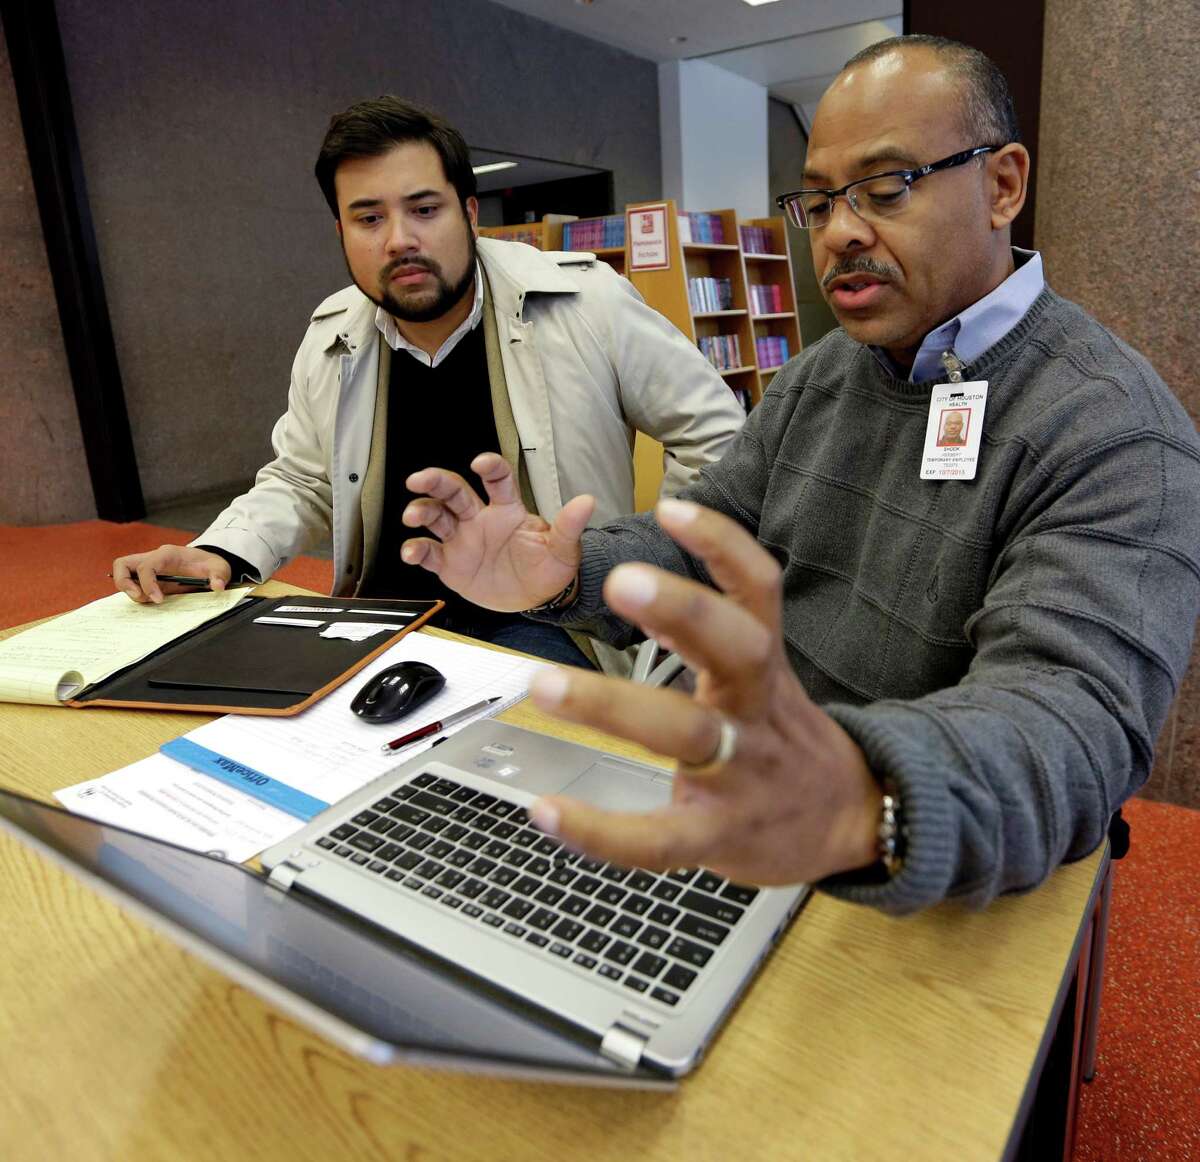 Herb Shook, right, helps David Ortez of Houston get information on the Affordable Care Act last year. ﻿